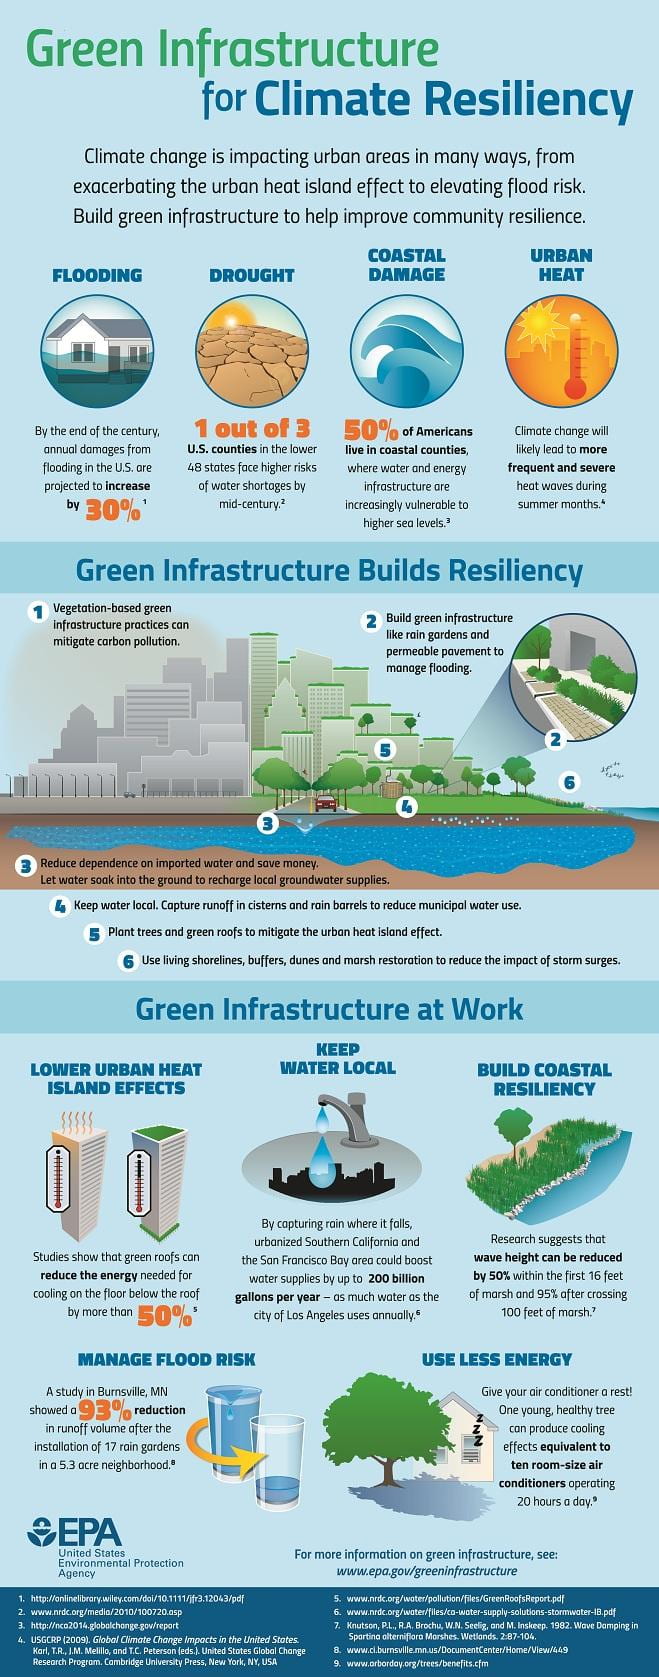 Infographic highlighing the environmental benefits of green infrastructure